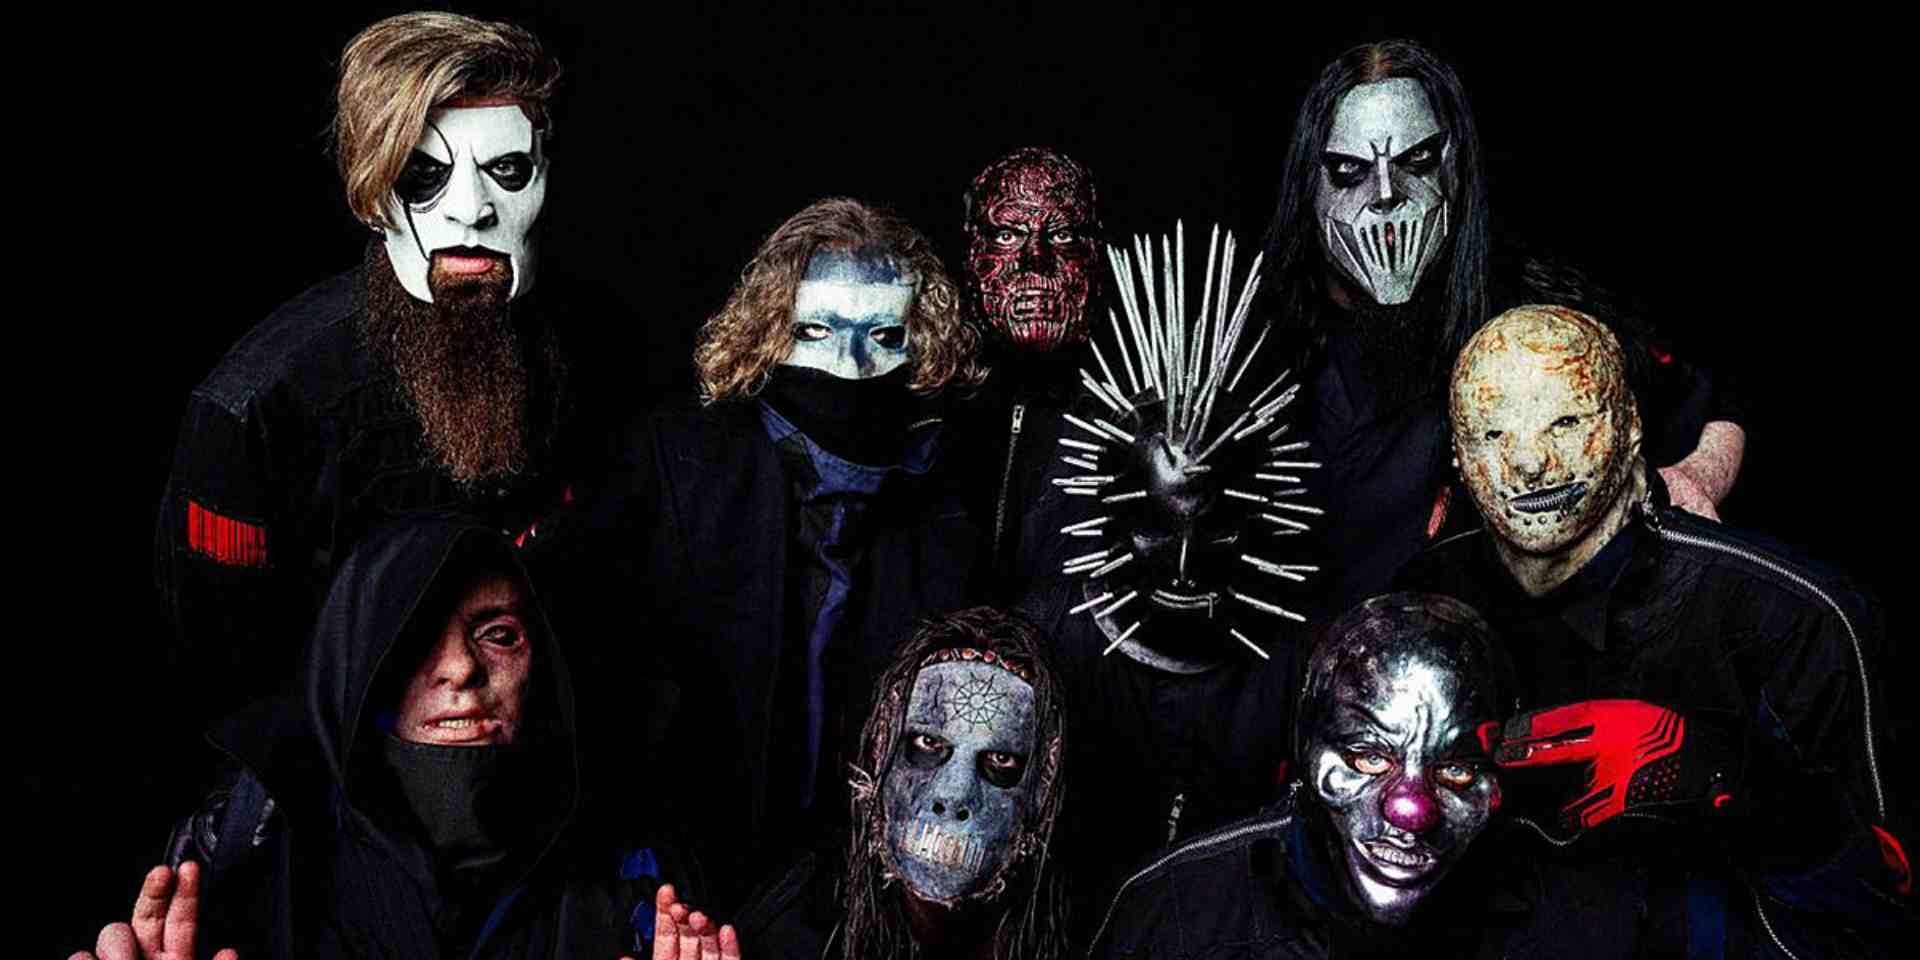 Slipknot might very well knock Ed Sheeran off top spot of UK Official Albums Chart